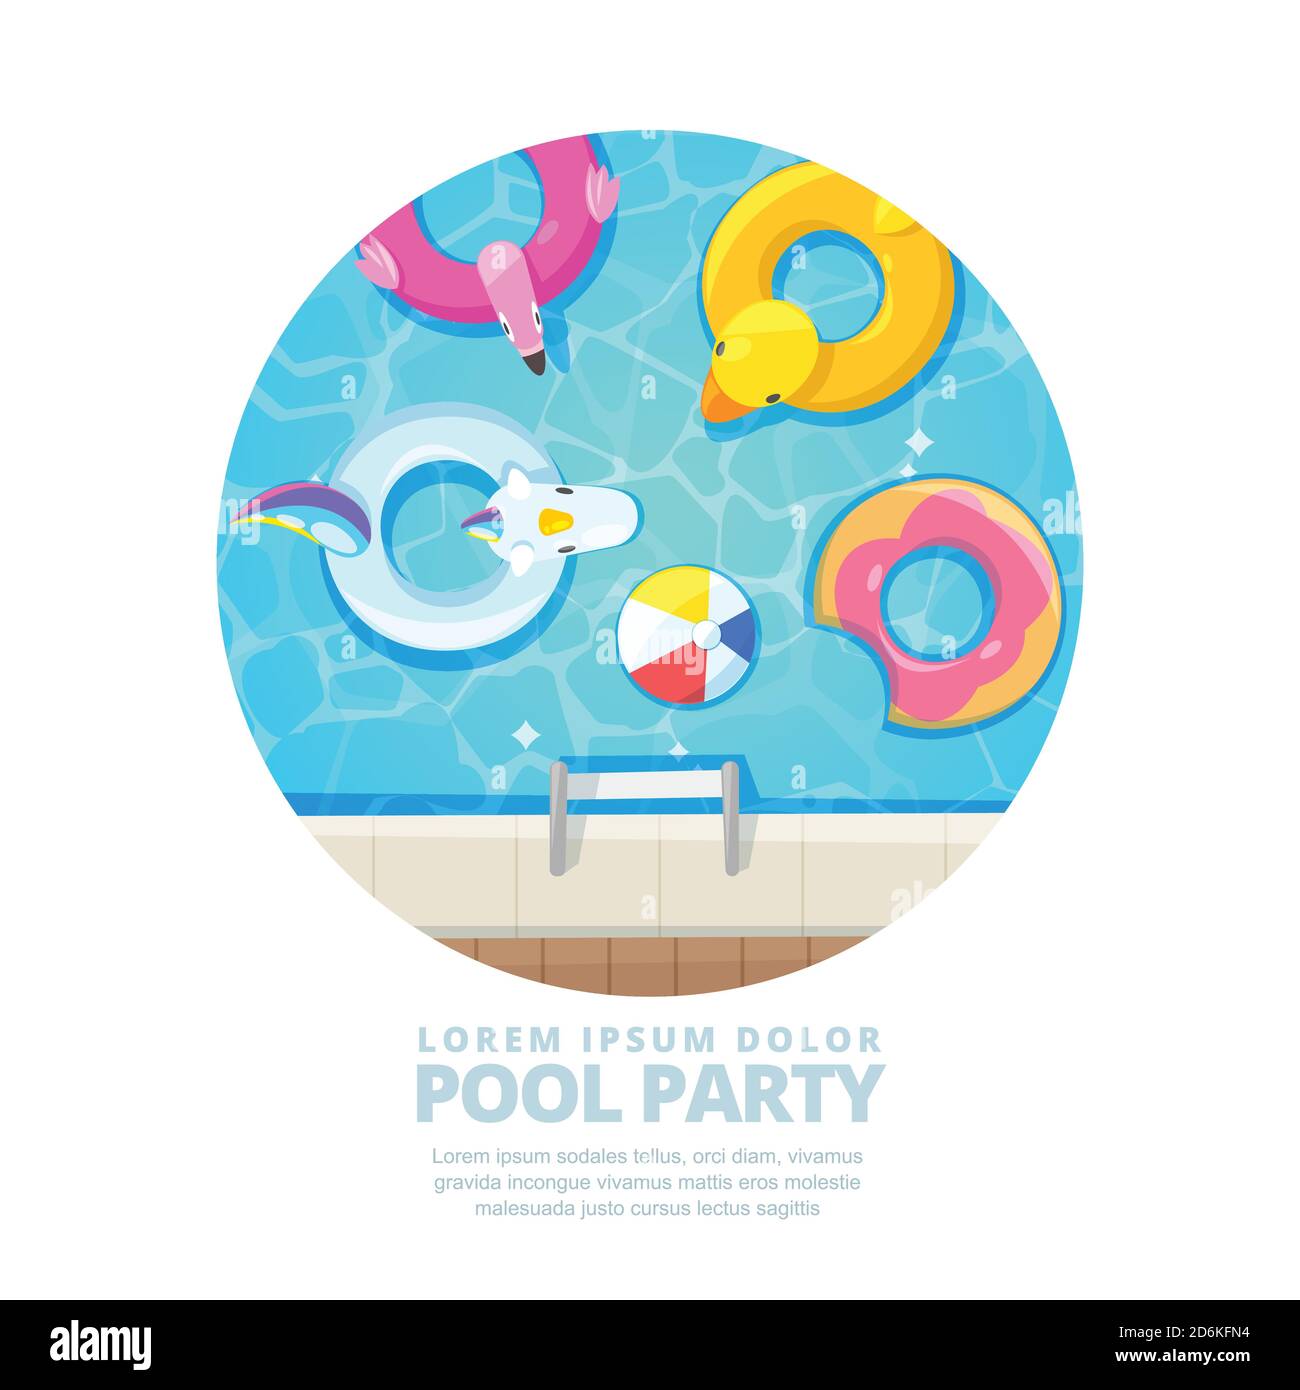 Isolated circle swimming pool, vector cartoon illustration. Summer poster, banner layout. Unicorn, flamingo, duck, ball, donut cute floats in water. F Stock Vector